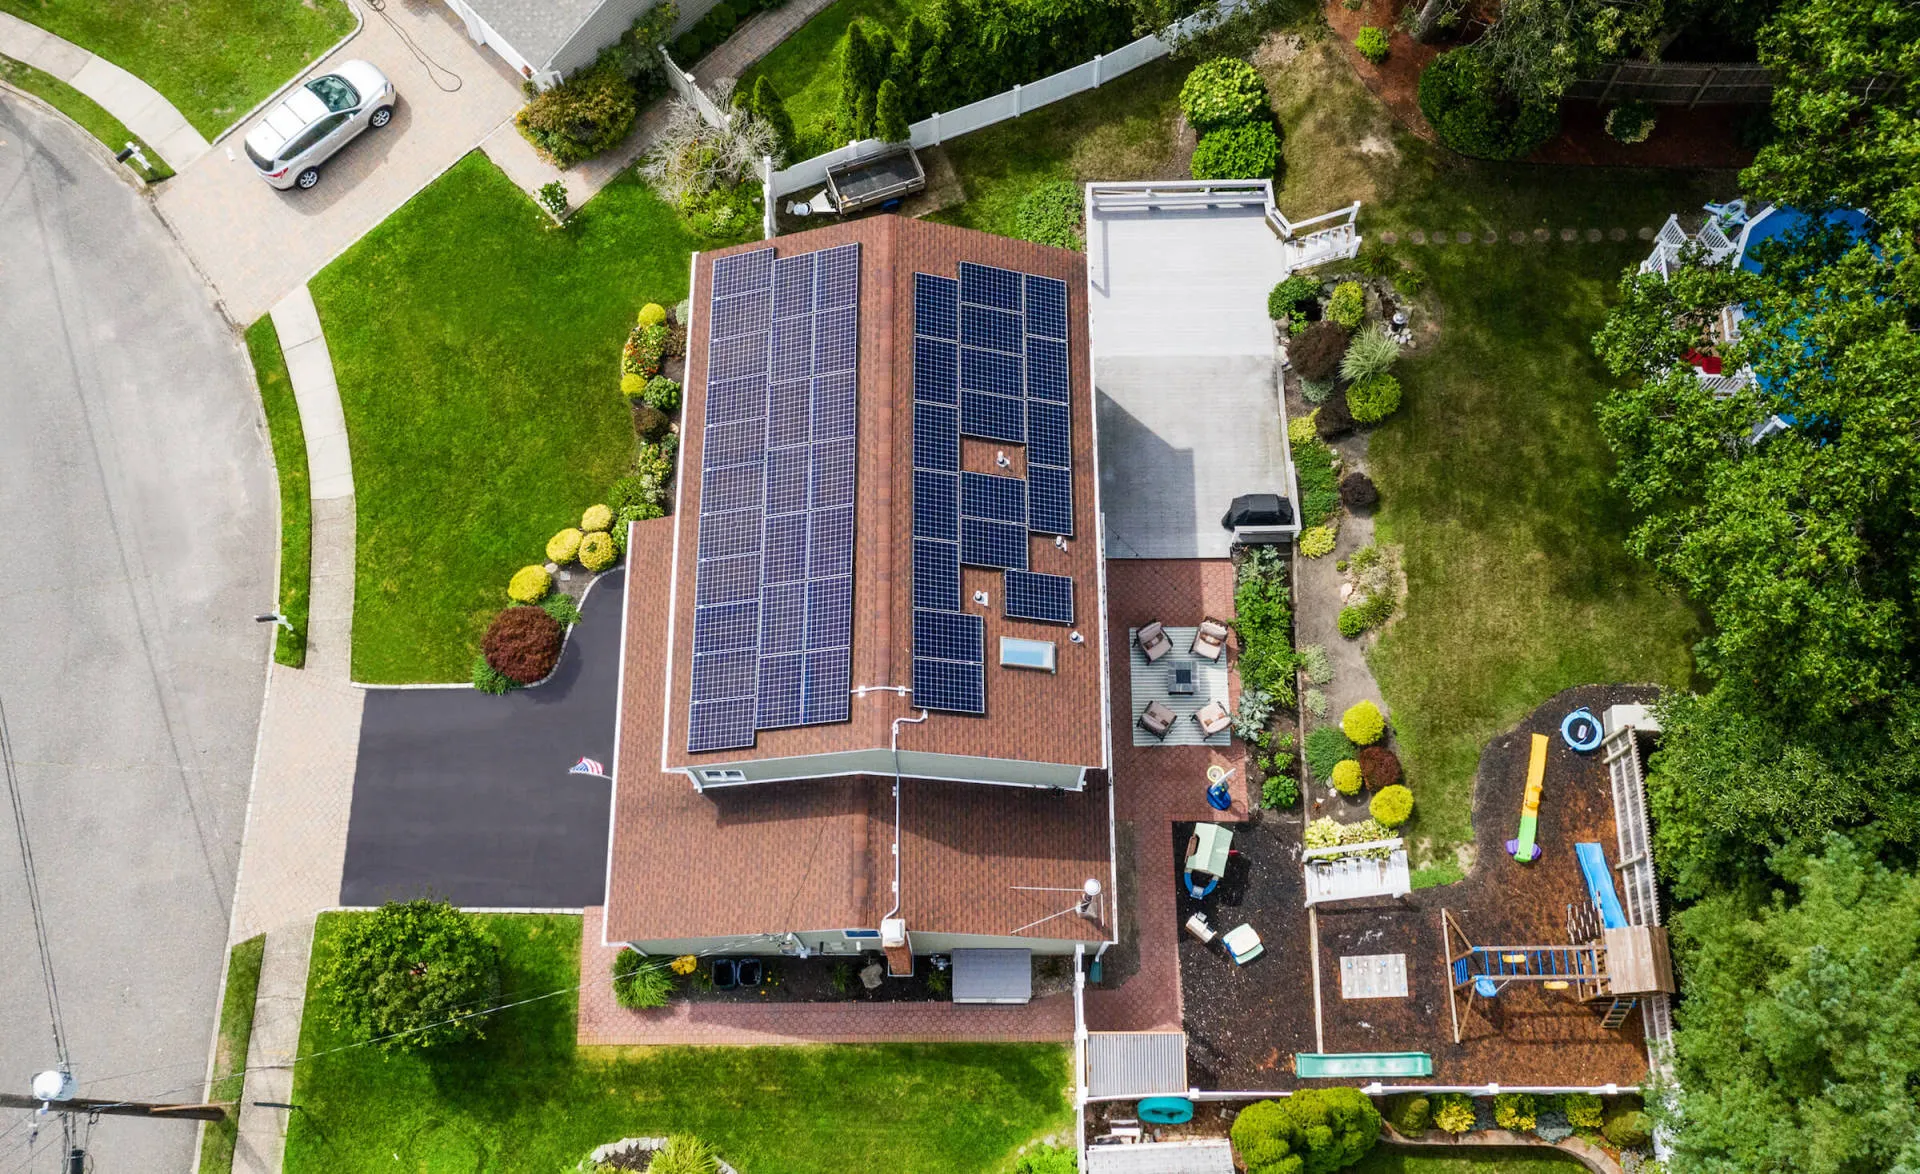 A house on Long Island has a number of solar panels on the roof.